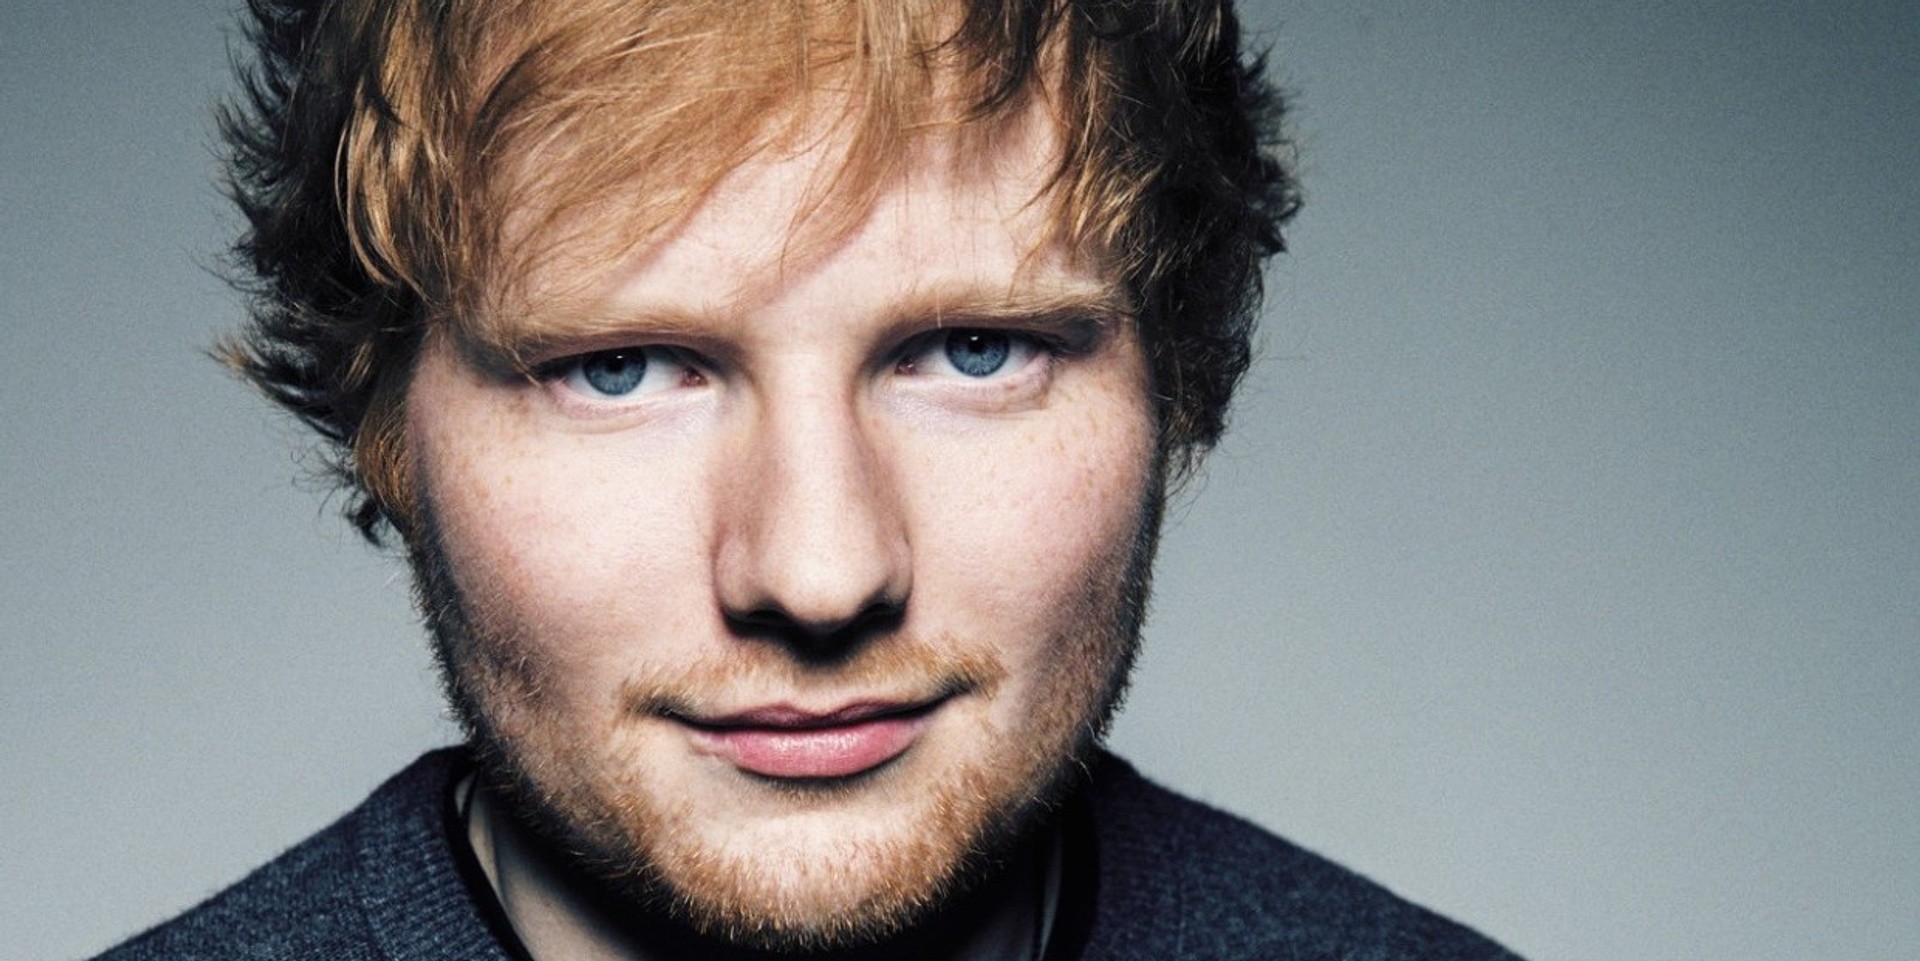 Ed Sheeran adds second show in Singapore, first show sold out in under an hour